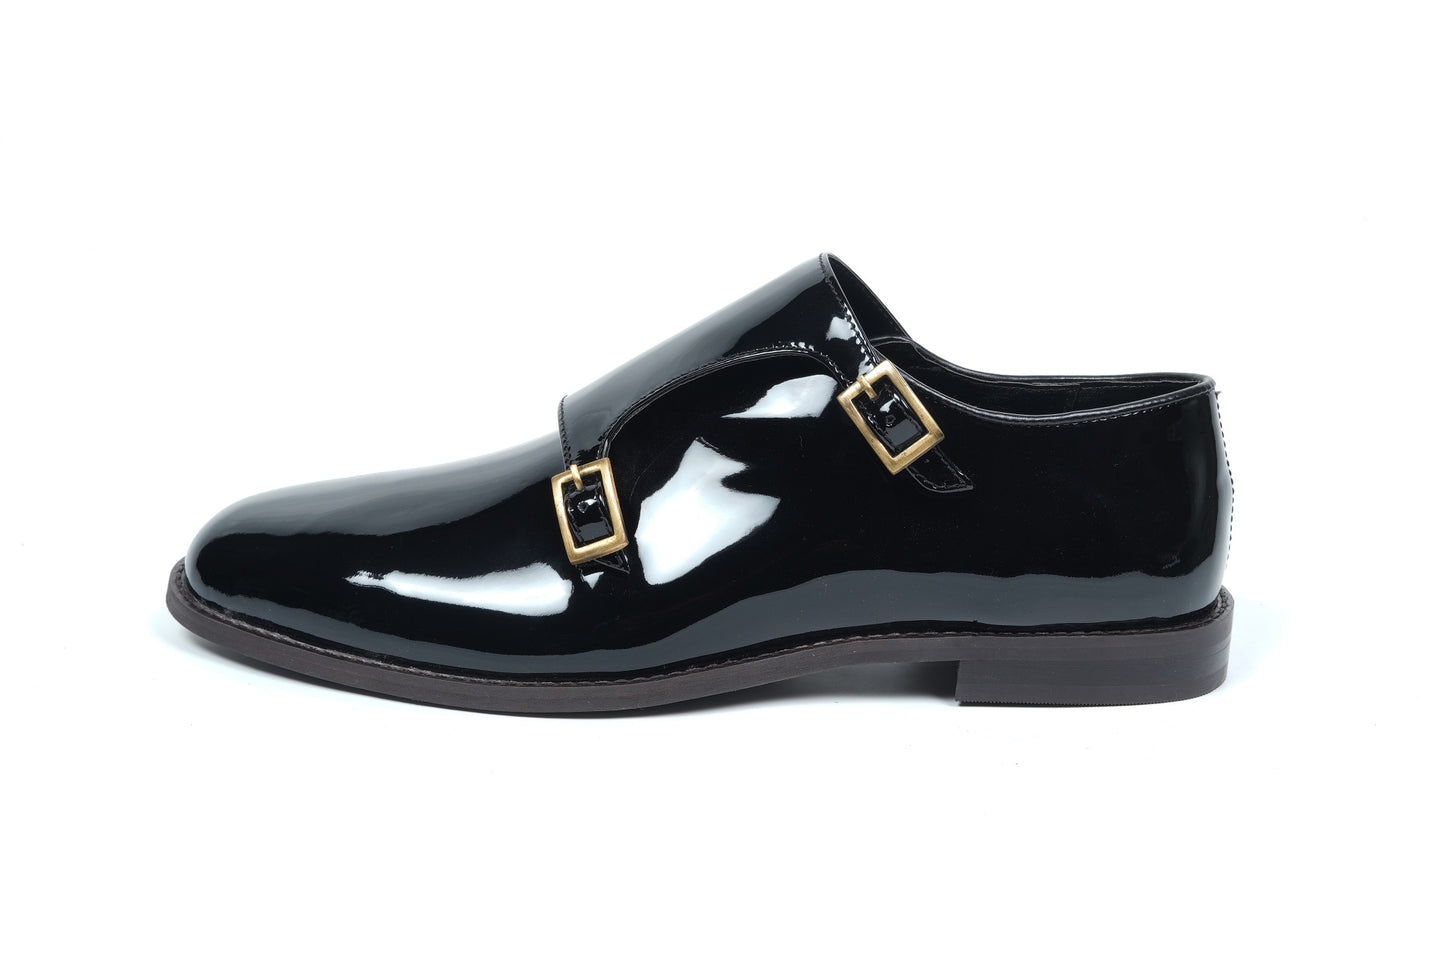 PATENT LEATHER MONK STRAPS